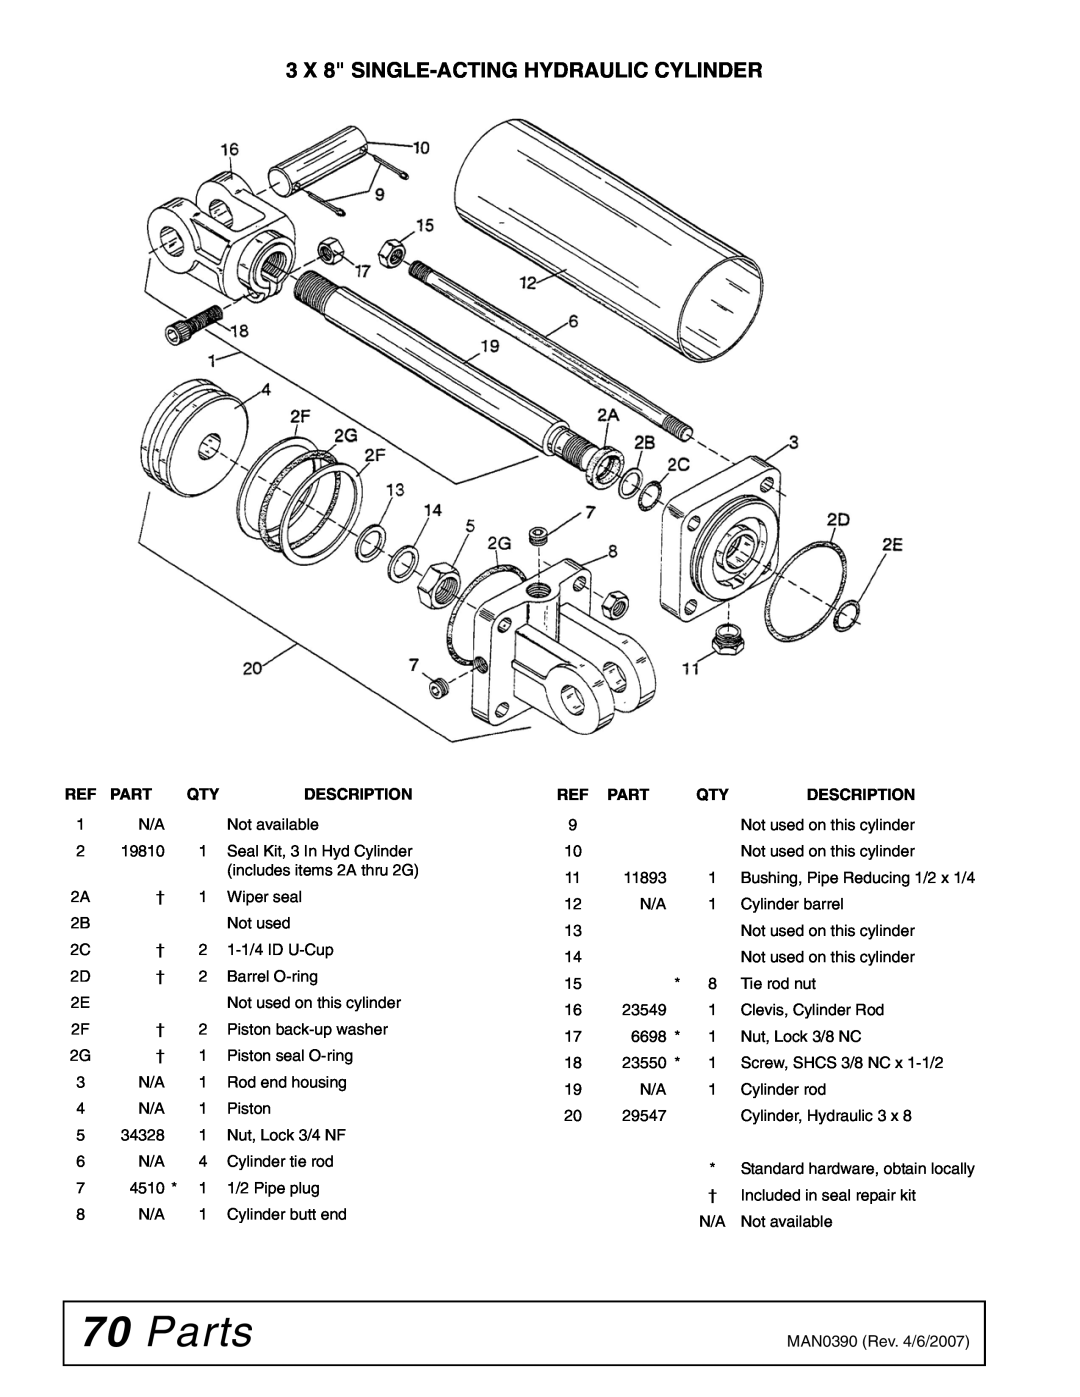 Woods Equipment DS96, DS120 manual Parts, 3 X 8 SINGLE-ACTING HYDRAULIC CYLINDER, Description 